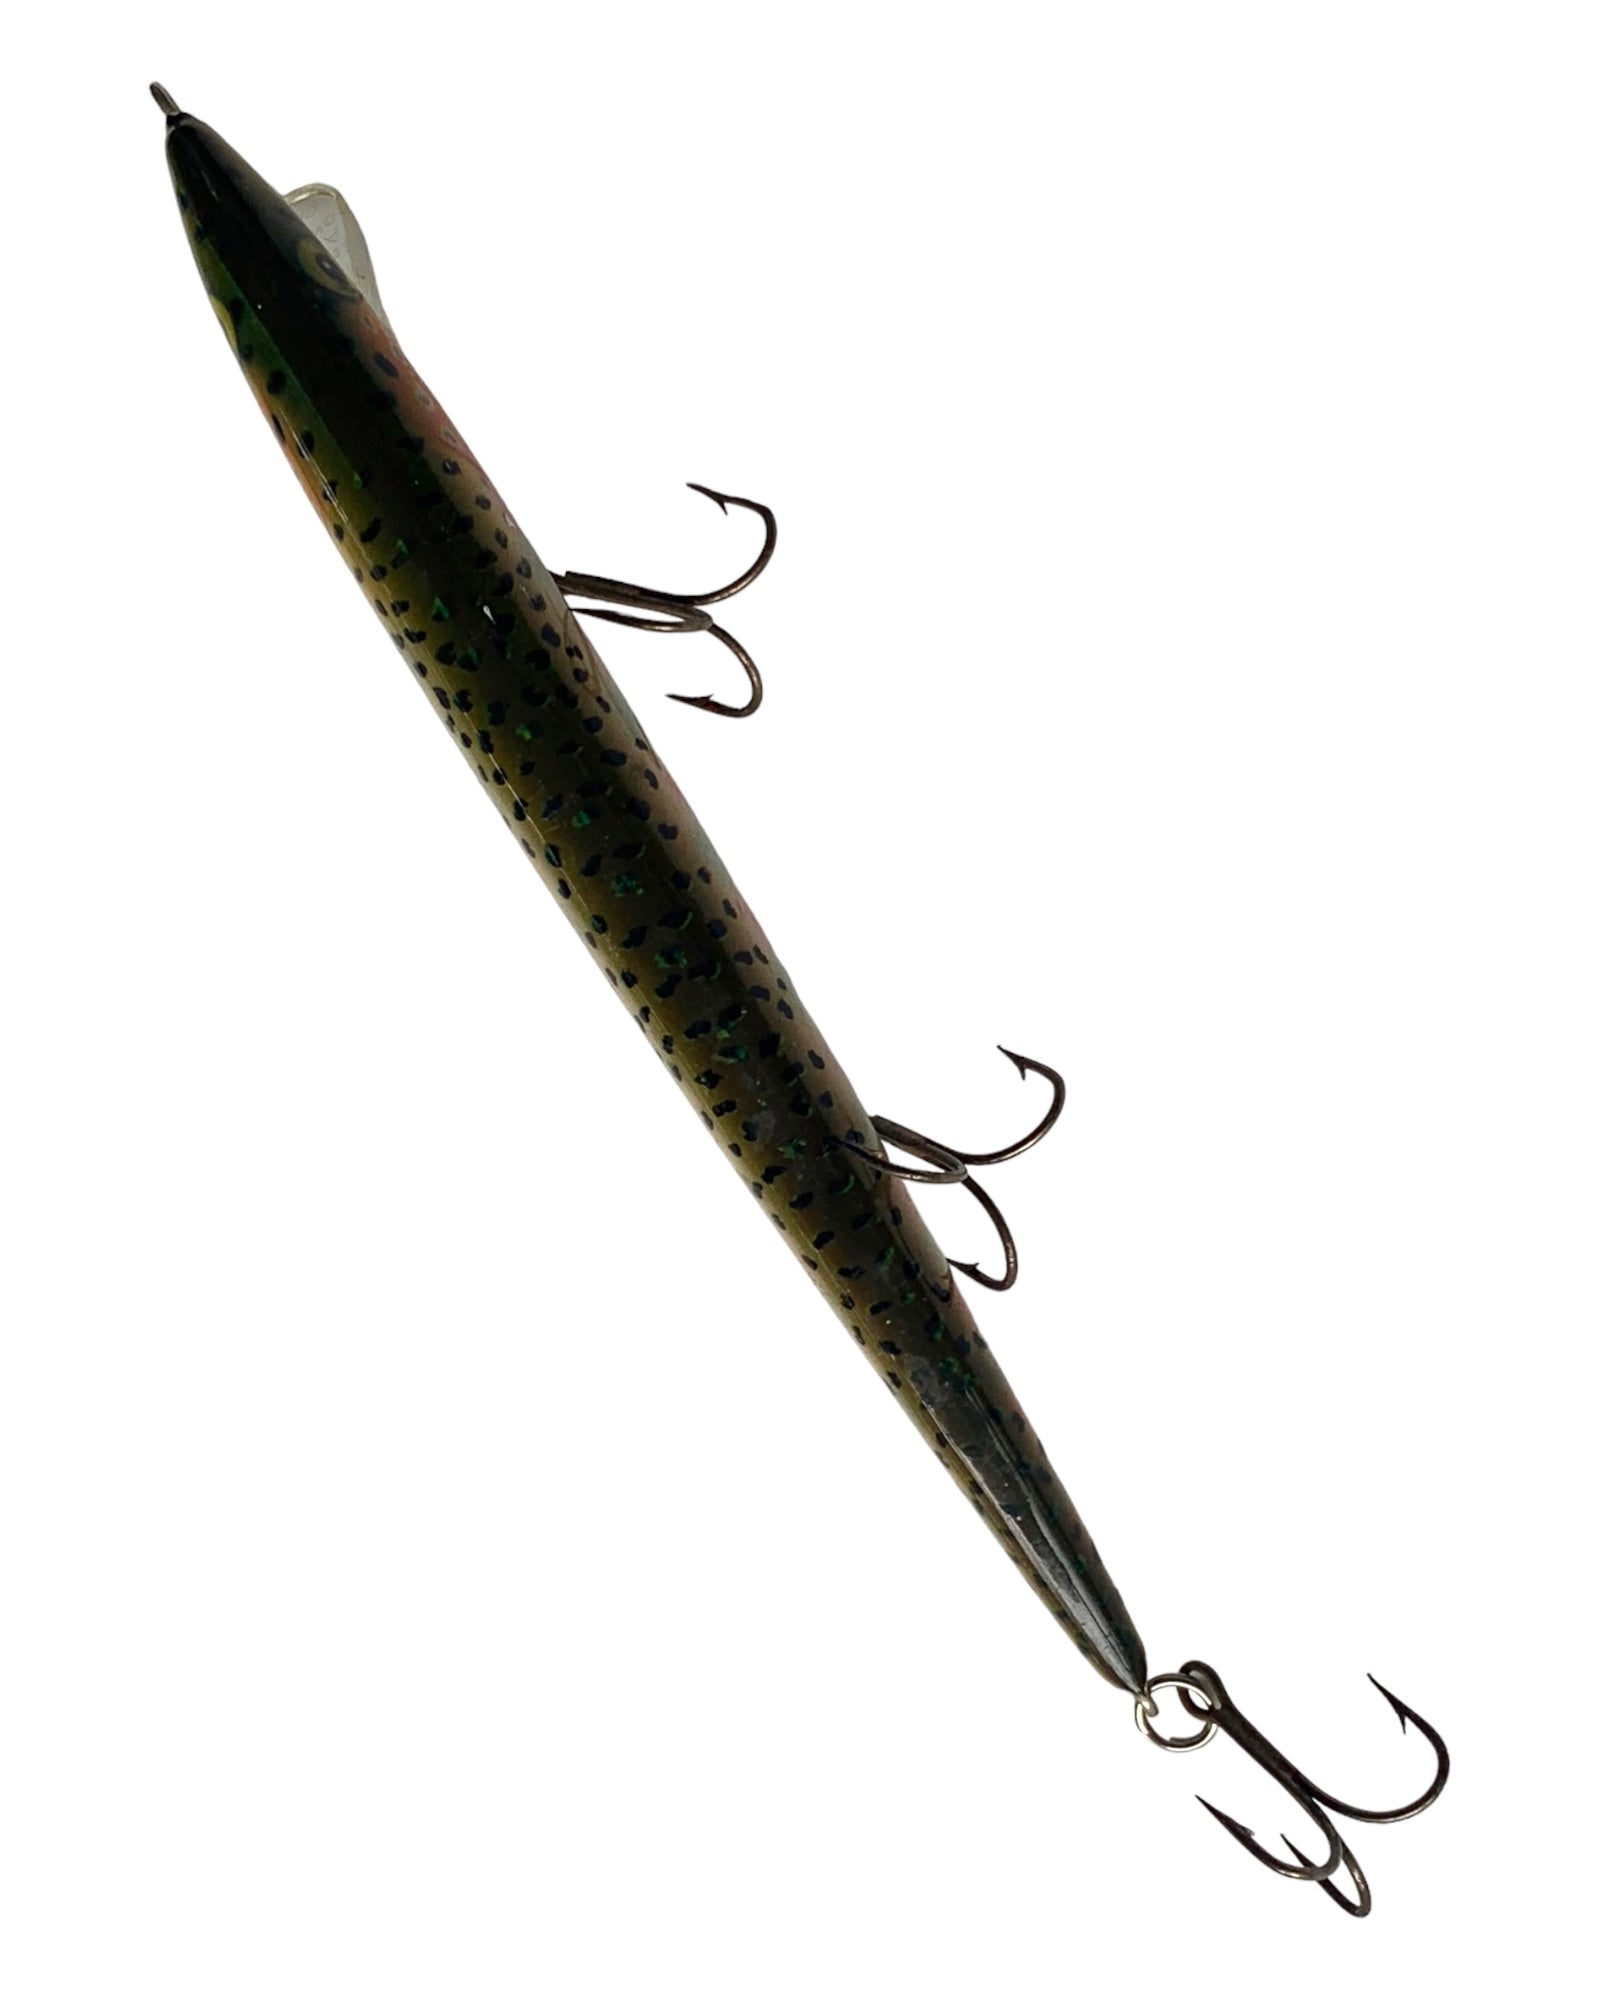 RAPALA ORIGINAL FLOATING 18 Fishing Lure • BROWN TROUT – Toad Tackle